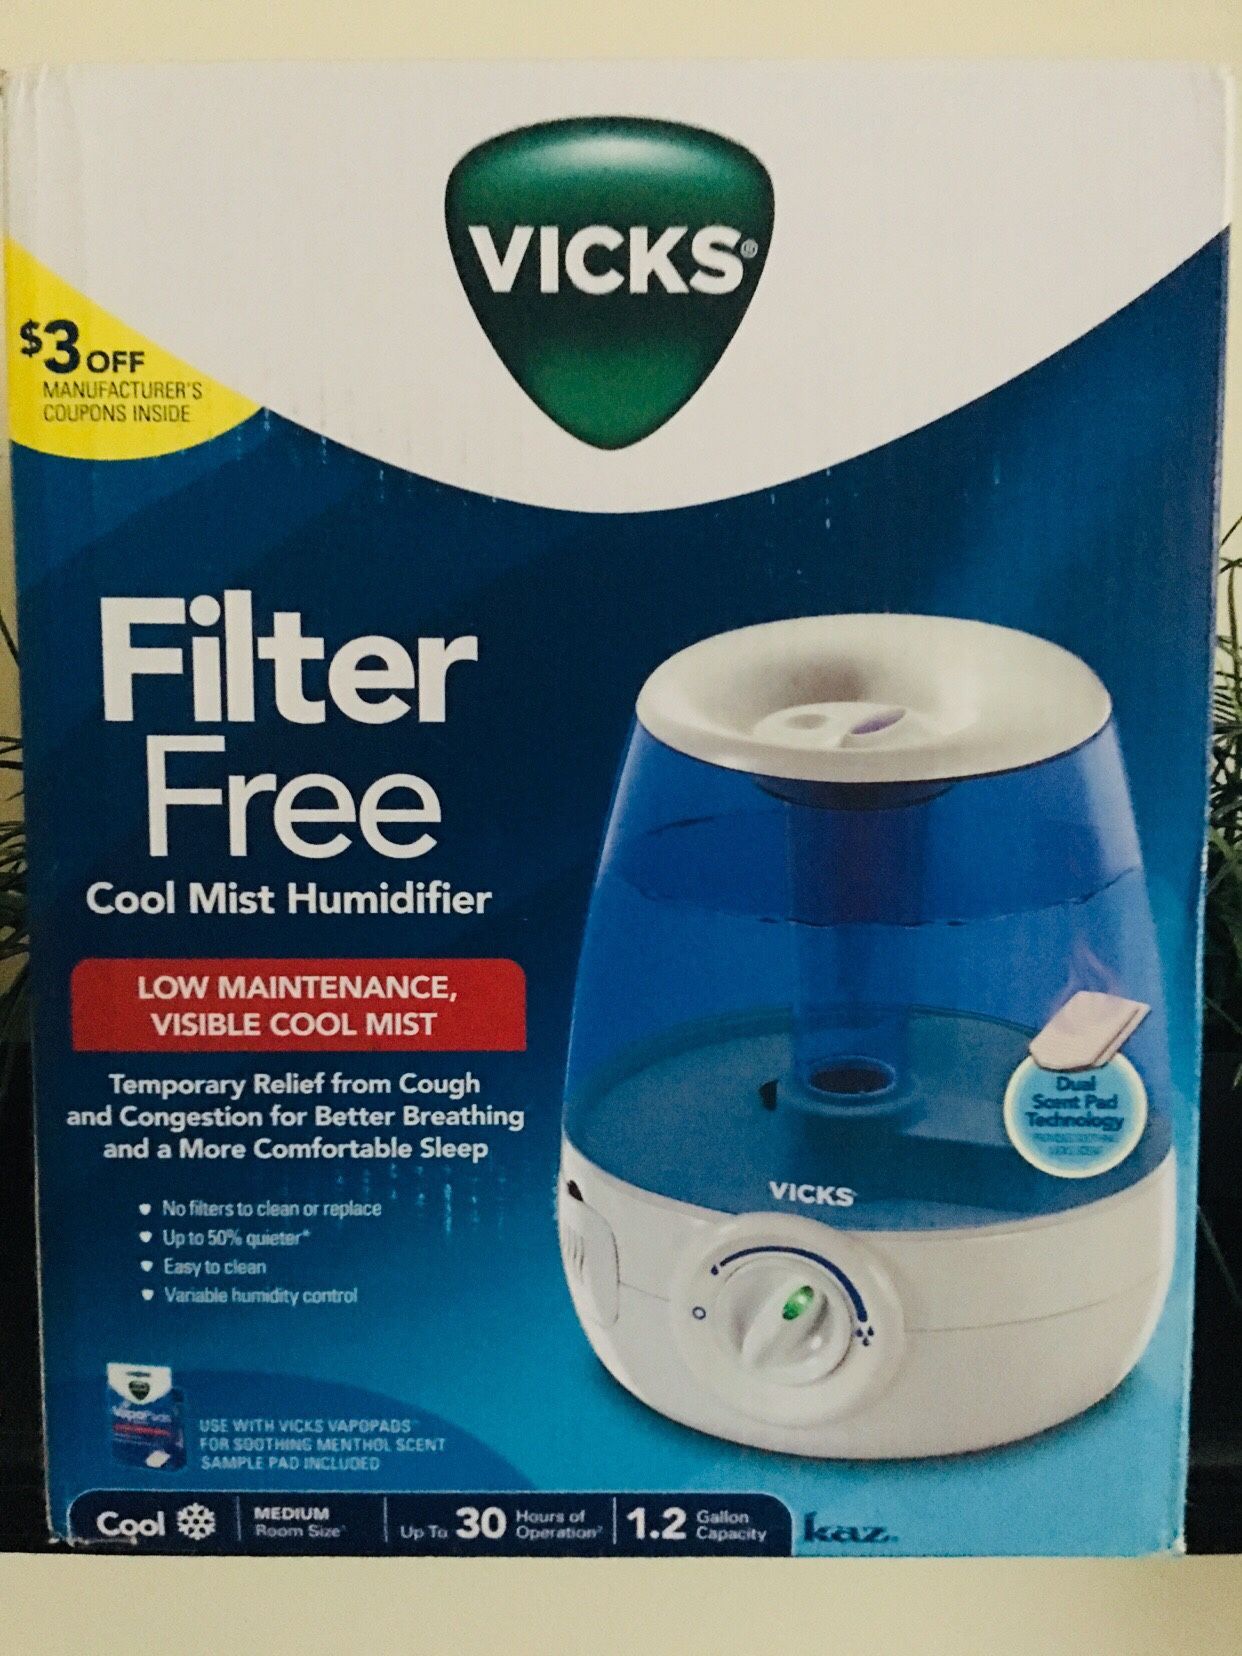 Filter Free Cool Mist Humidifier “New”